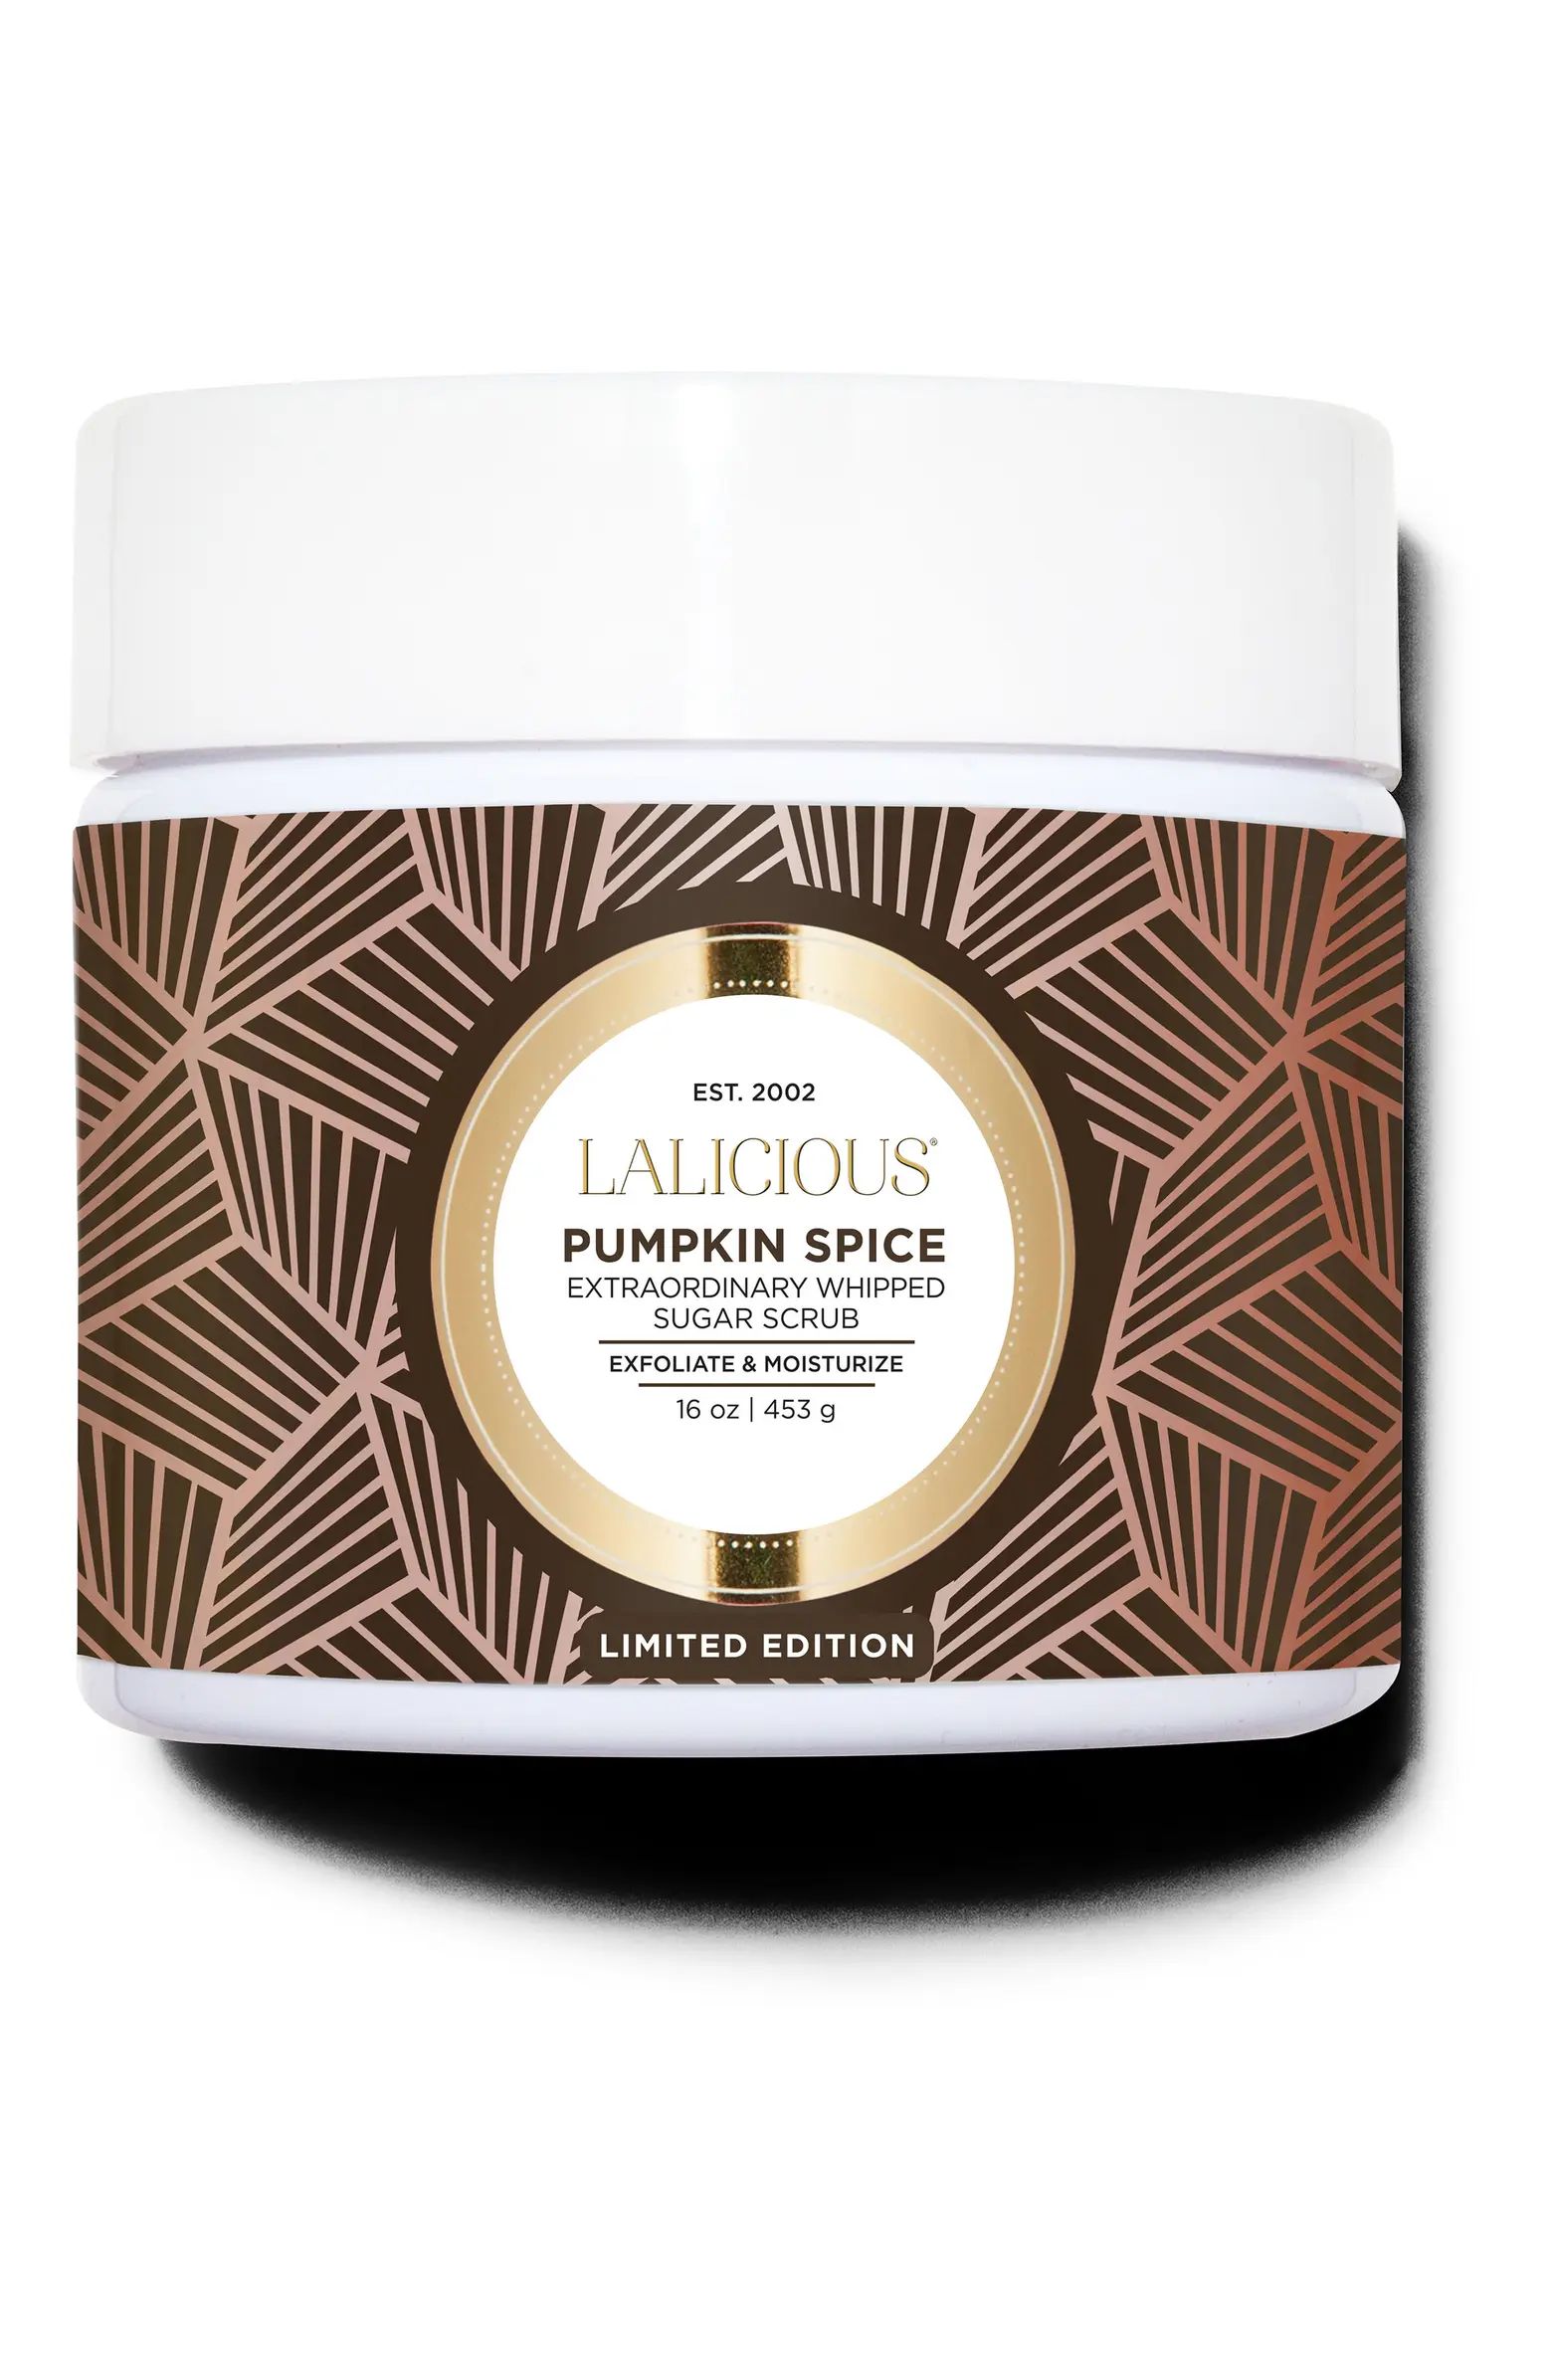 LALICIOUS Pumpkin Spice Extraordinary Whipped Sugar Scrub | Nordstrom | Nordstrom